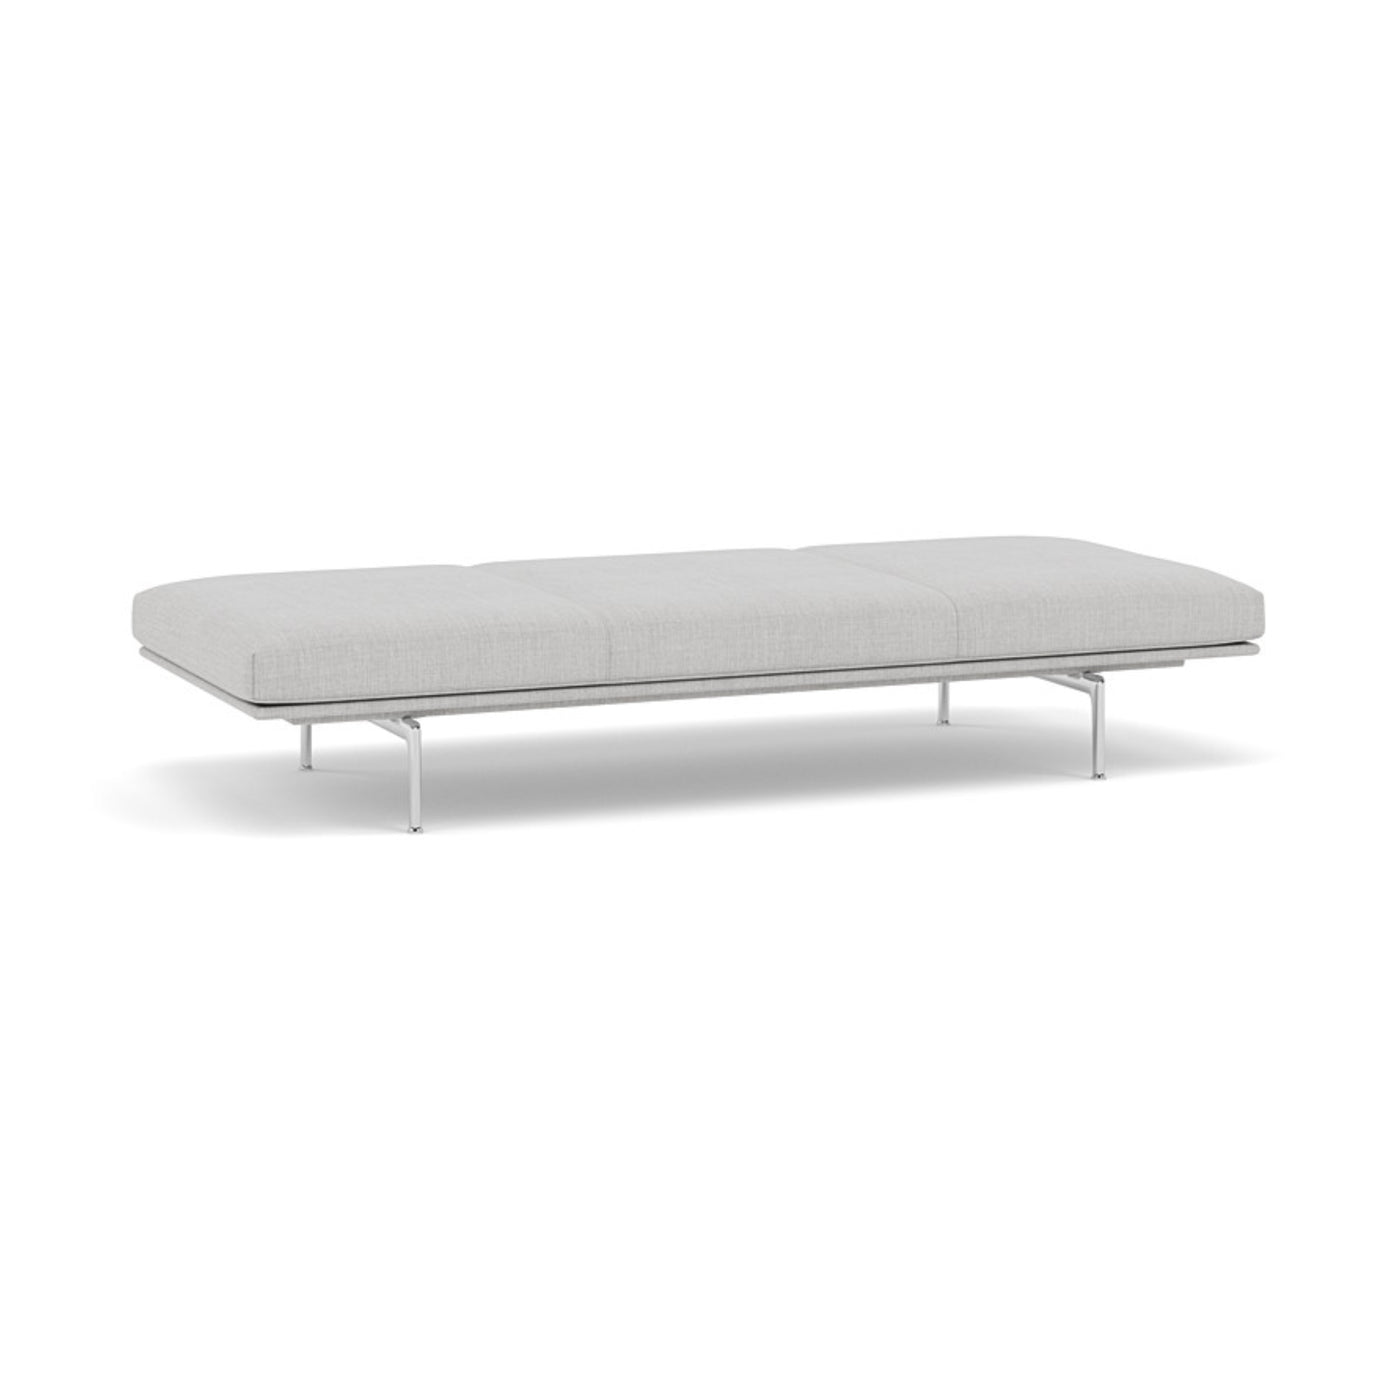 Muuto Outline Daybed, made to order from someday designs.#colour_remix-123